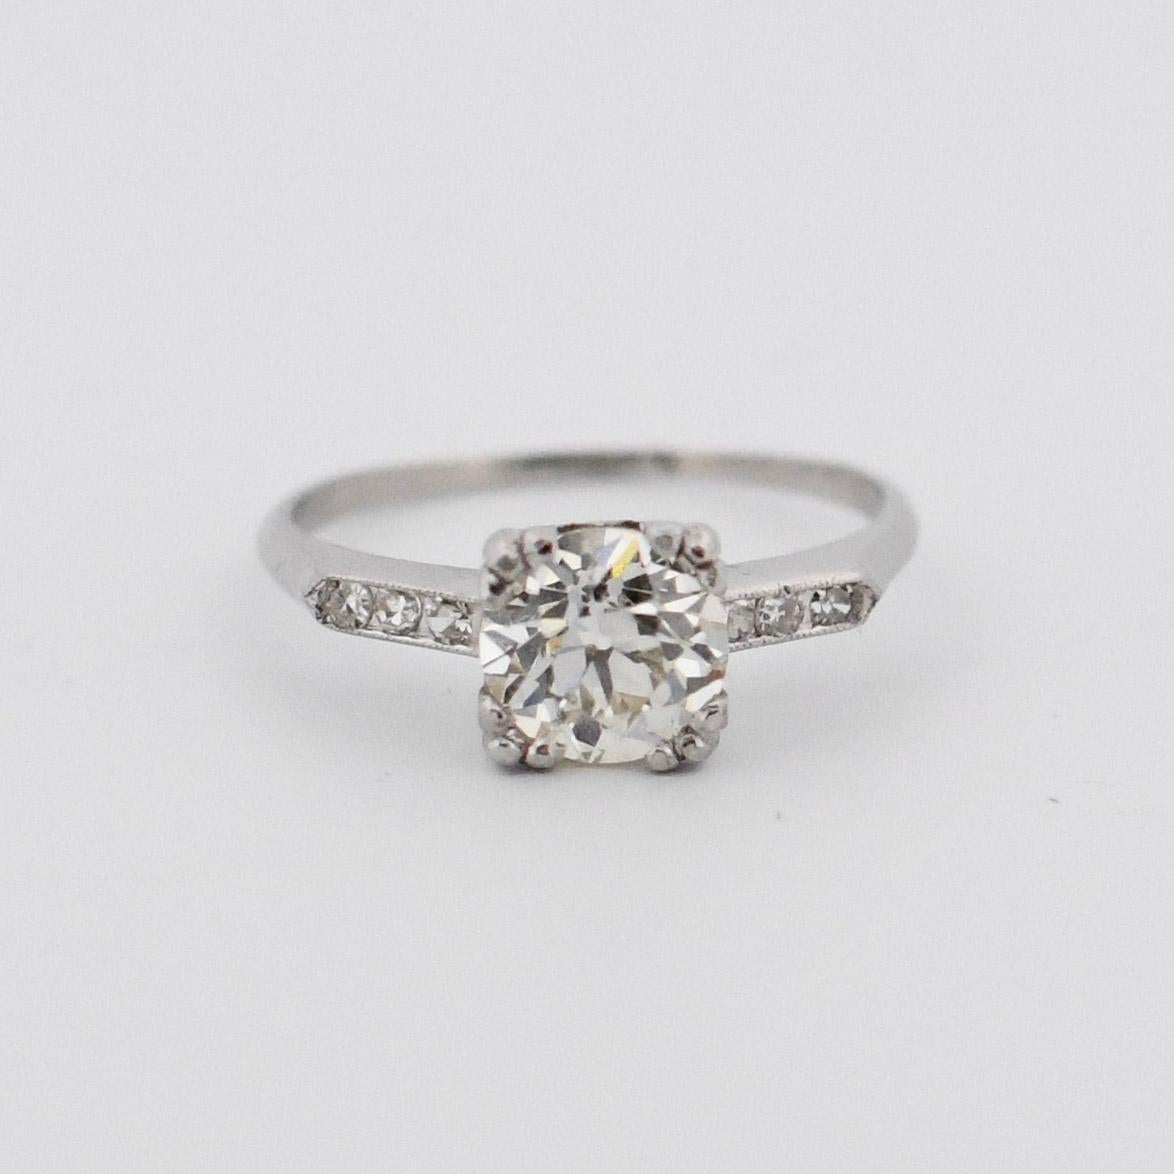 Presented here is a timeless platinum engagement ring in the Art Deco style. The delicate knife-edge band gracefully leads to a symmetrical arrangement of six single-cut diamonds on each side of the central old-cut gem. Encircling each trio of